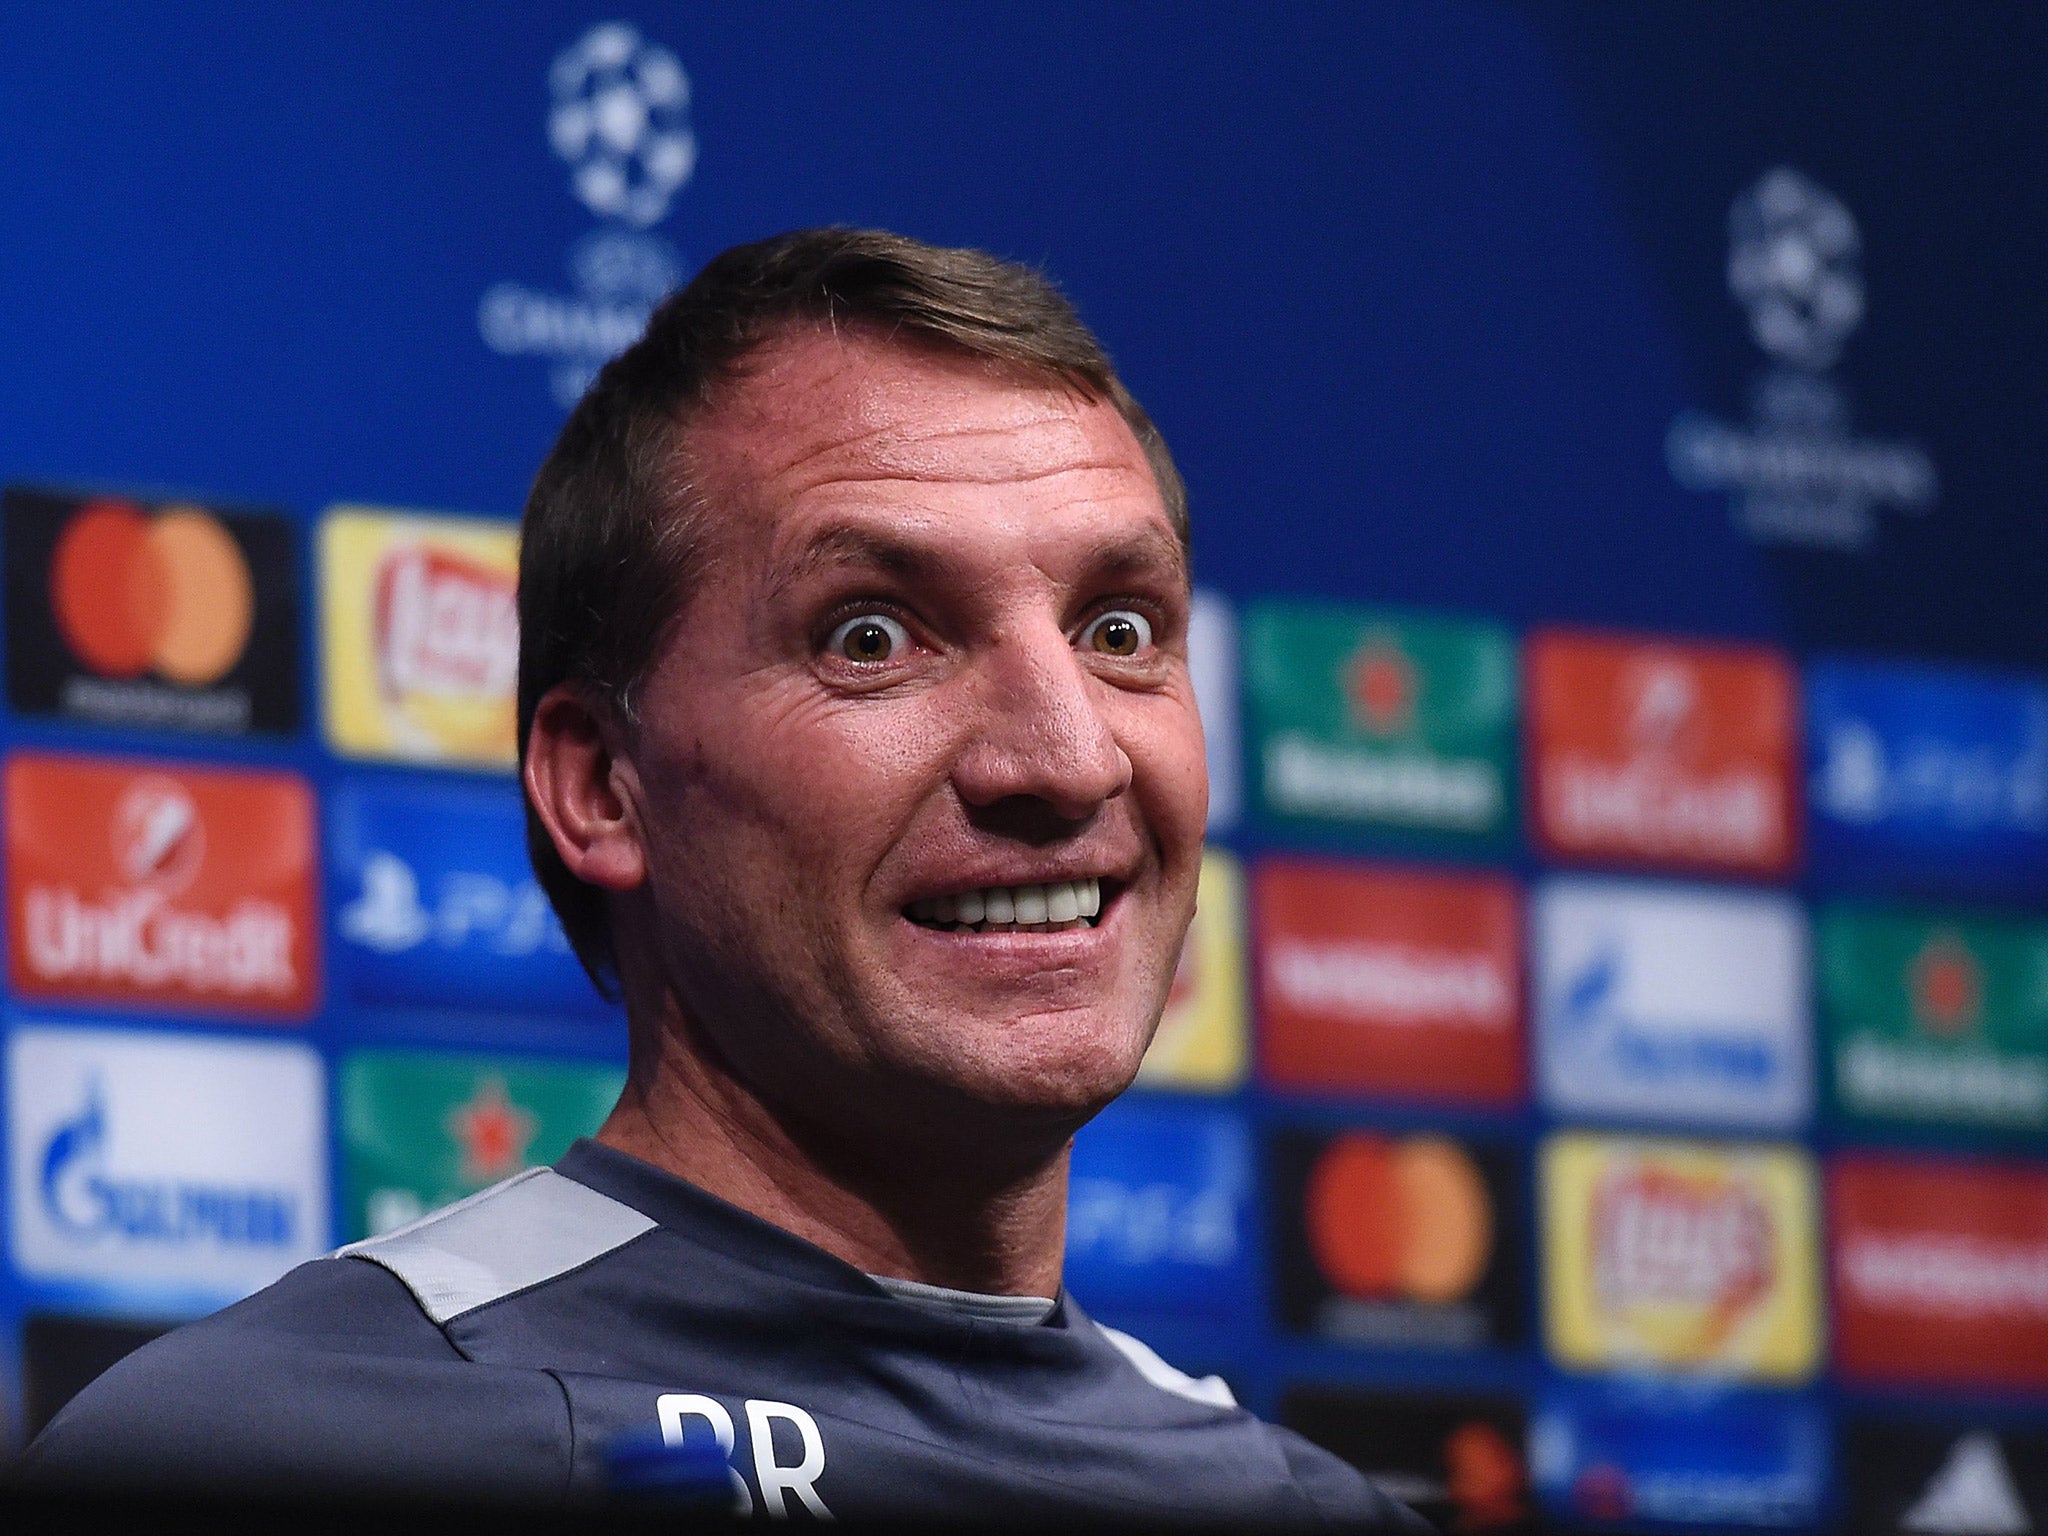 Brendan Rodgers believes Celtic have nothing to fear in facing Barcelona